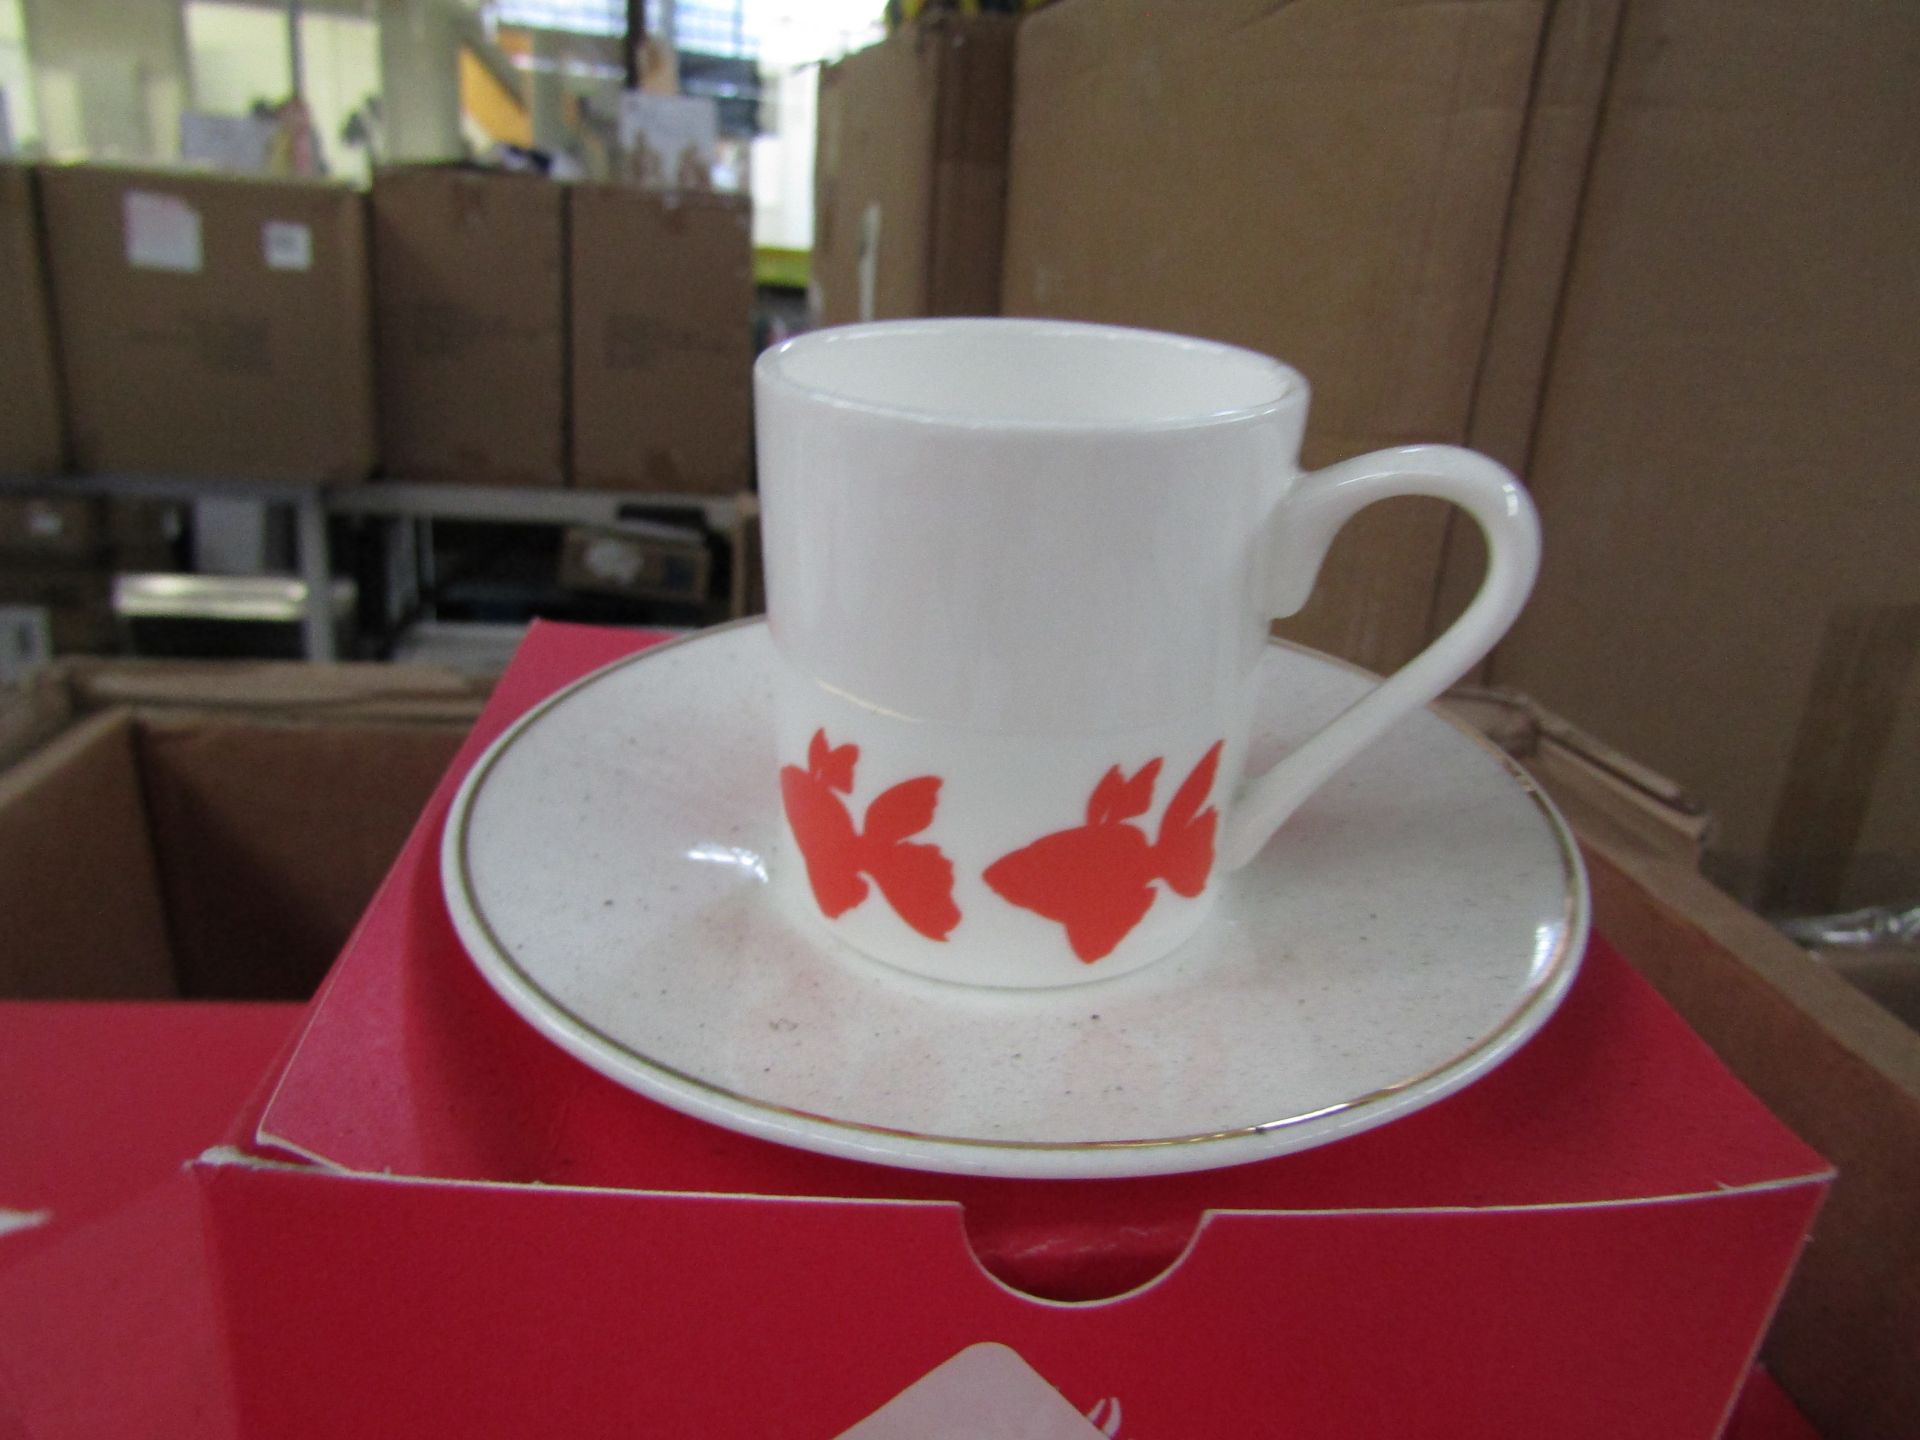 Mixed Lot of 4 x Homeware Outlet Customer Returns for Repair or Upcycling - Total RRP approx